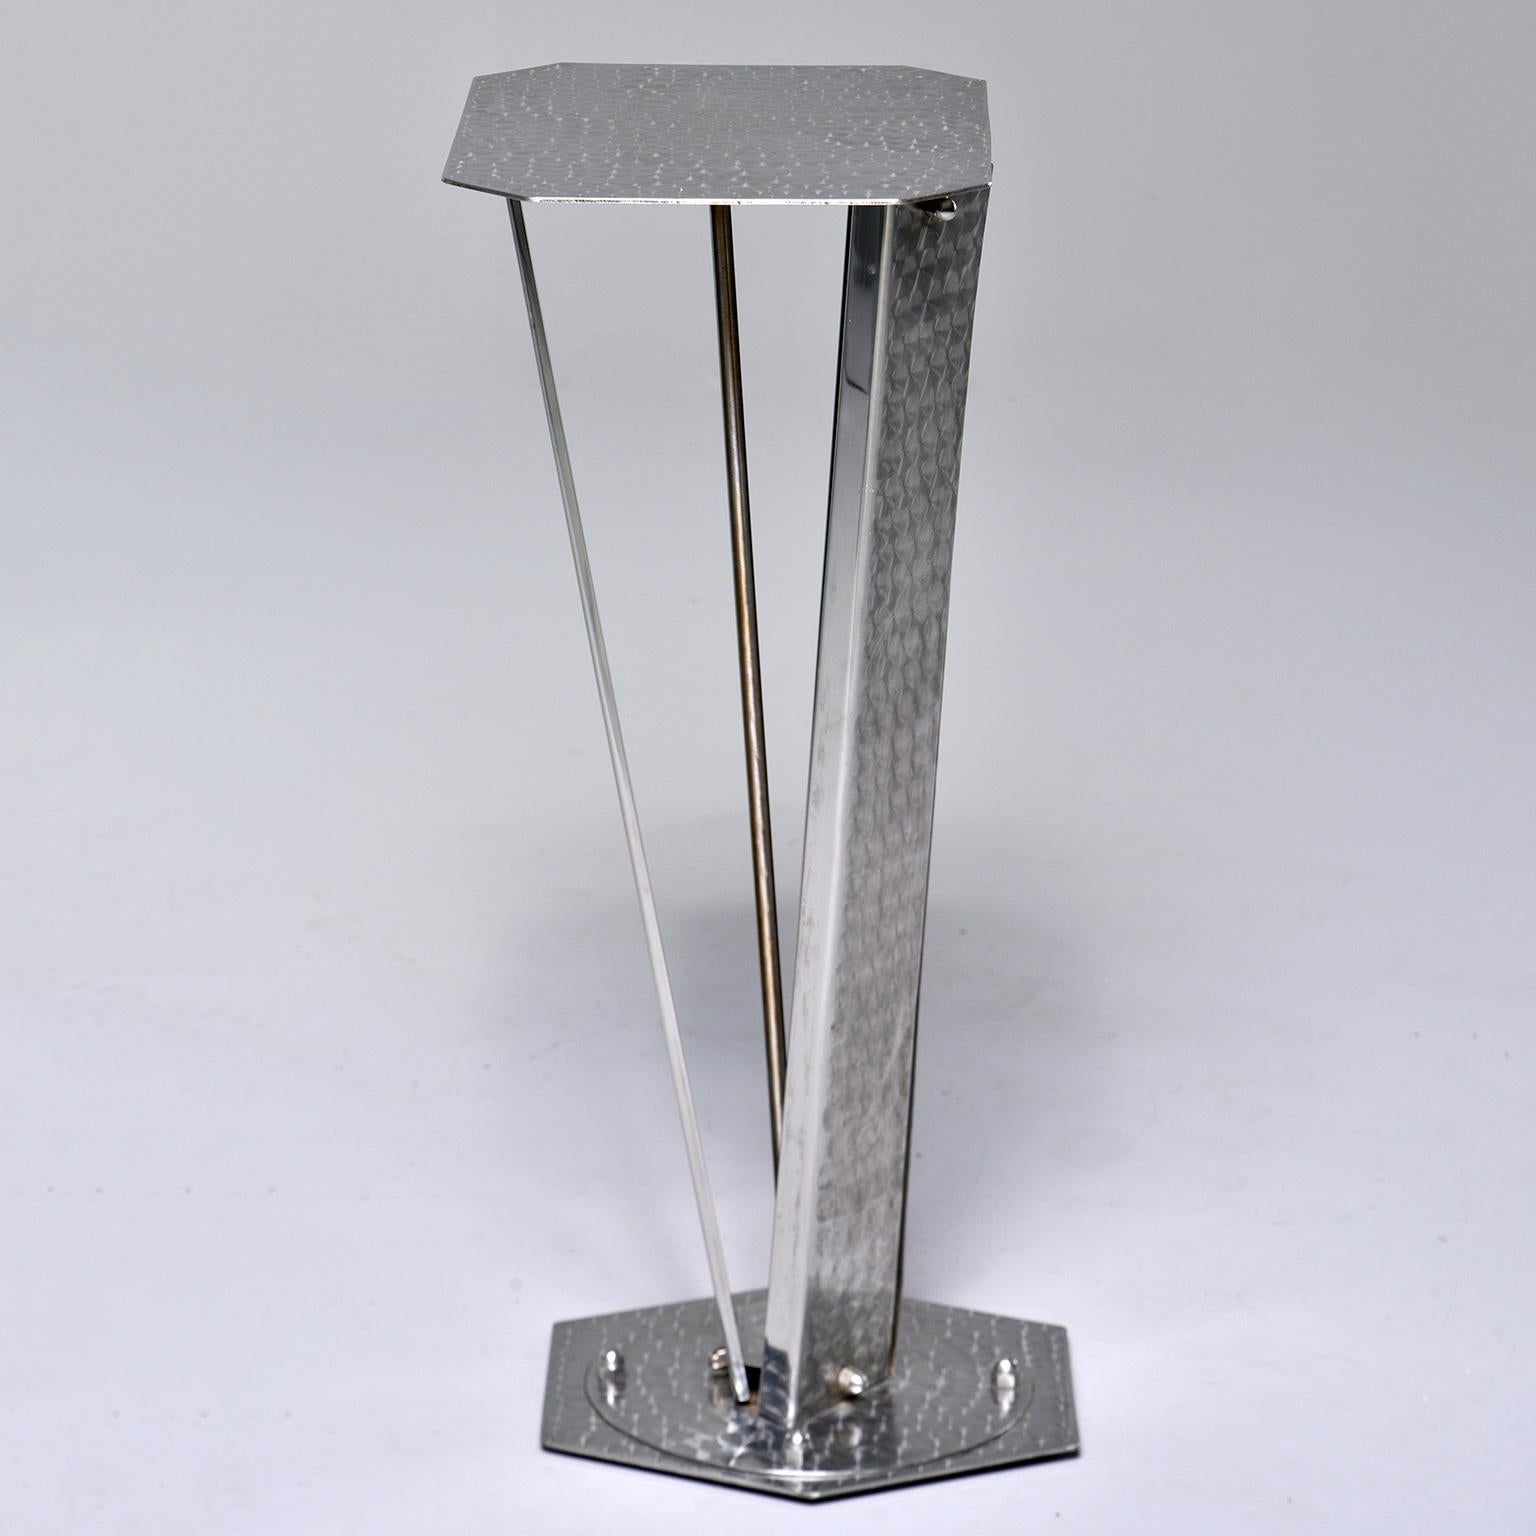 Small console or stand made of stainless steel with a brushed surface pattern circa 1960s. Table top measures: 15.75” wide x 12.25” deep. Unknown maker. Found in Italy.